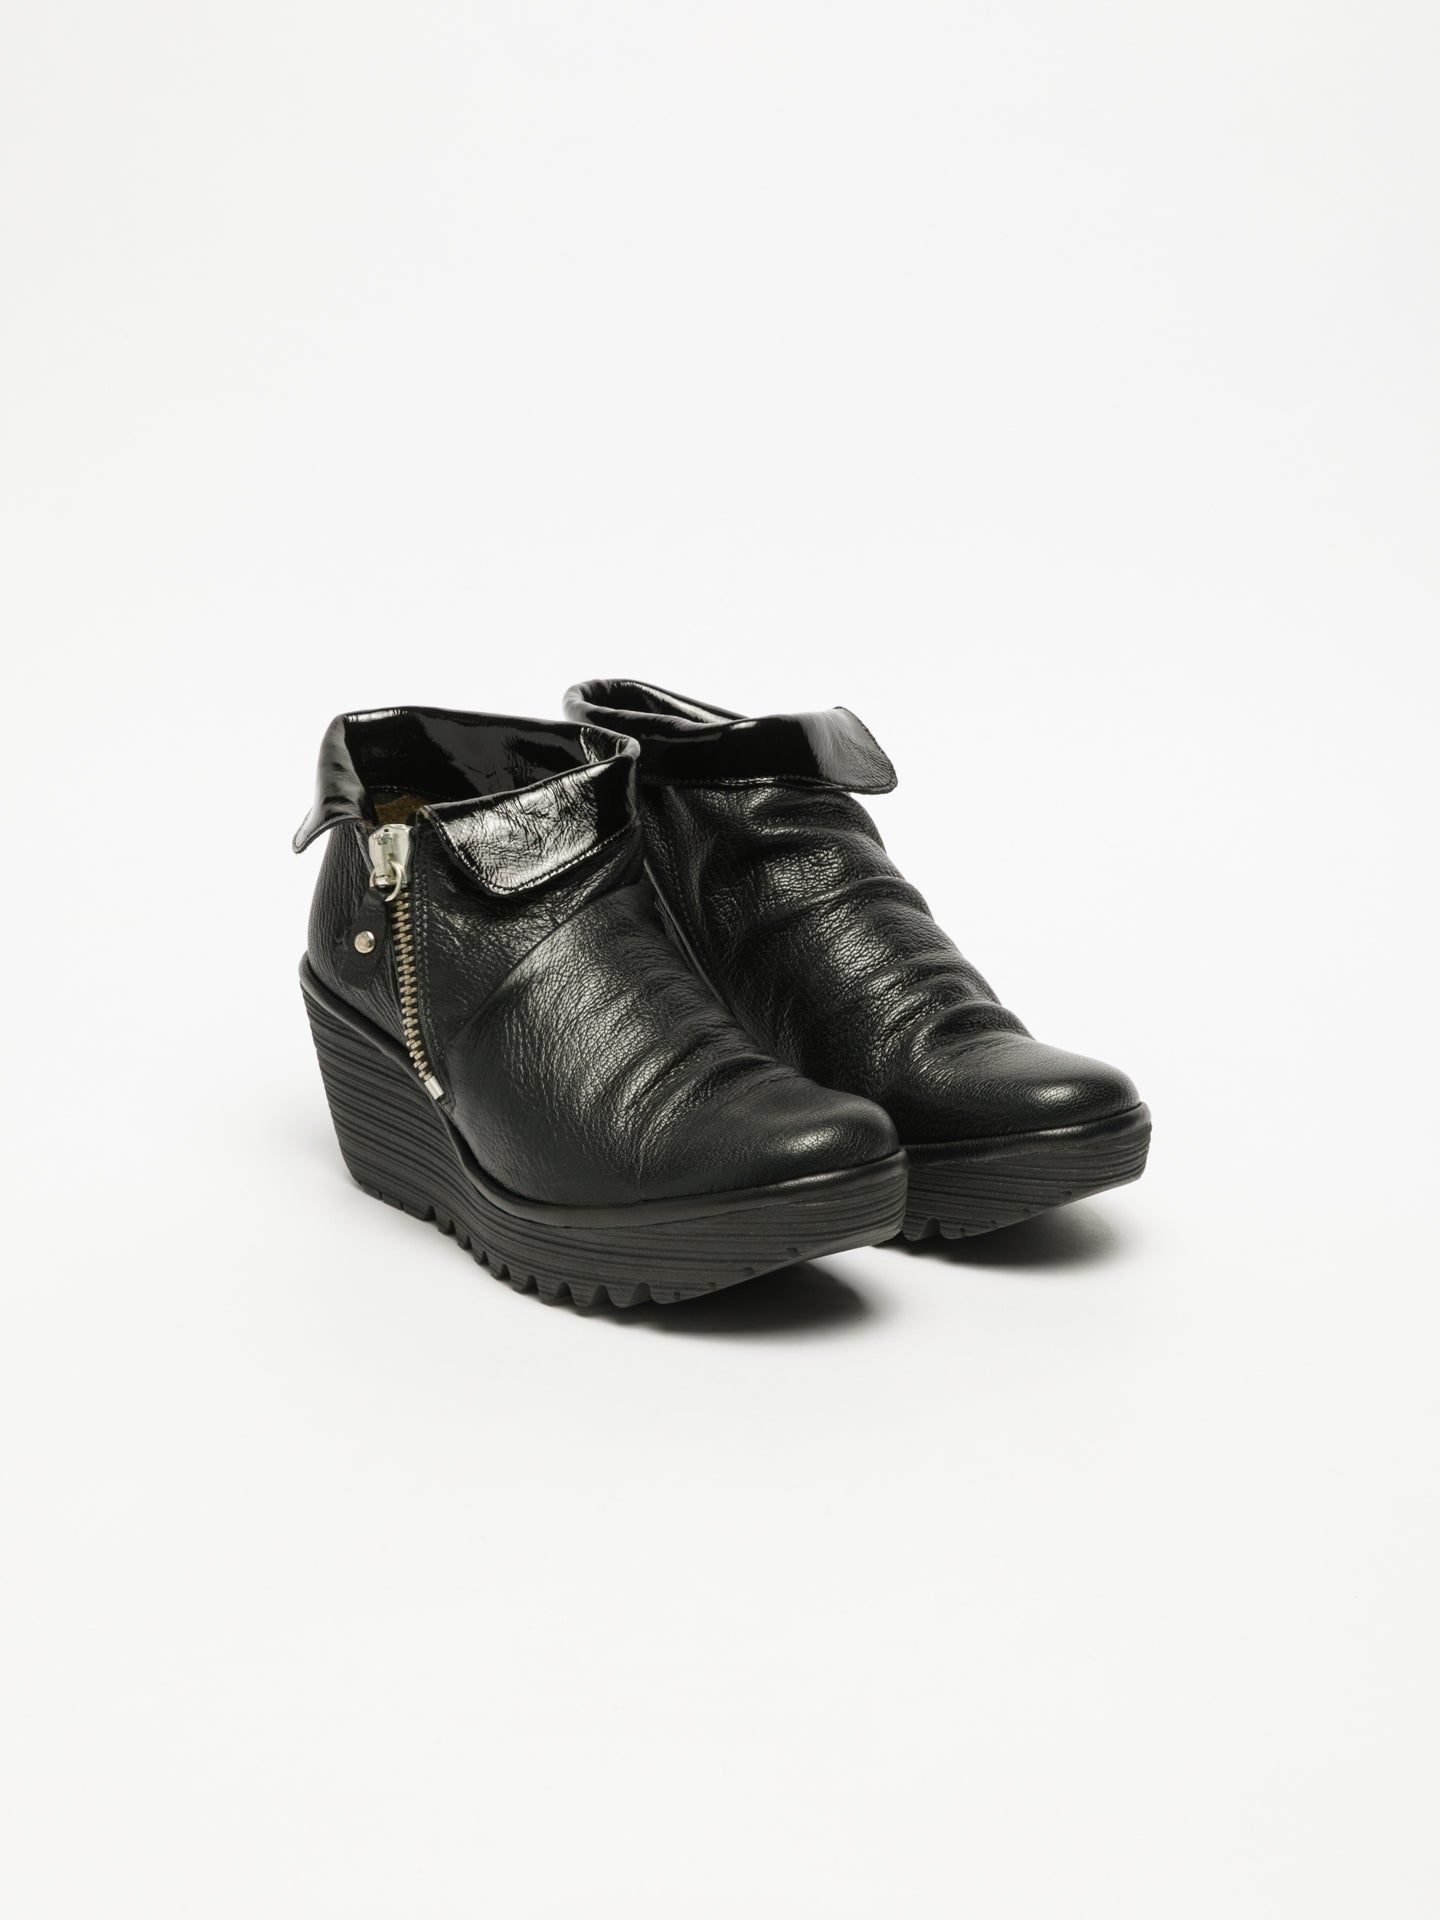 Fly London Carbon Black Zip Up Ankle Boots